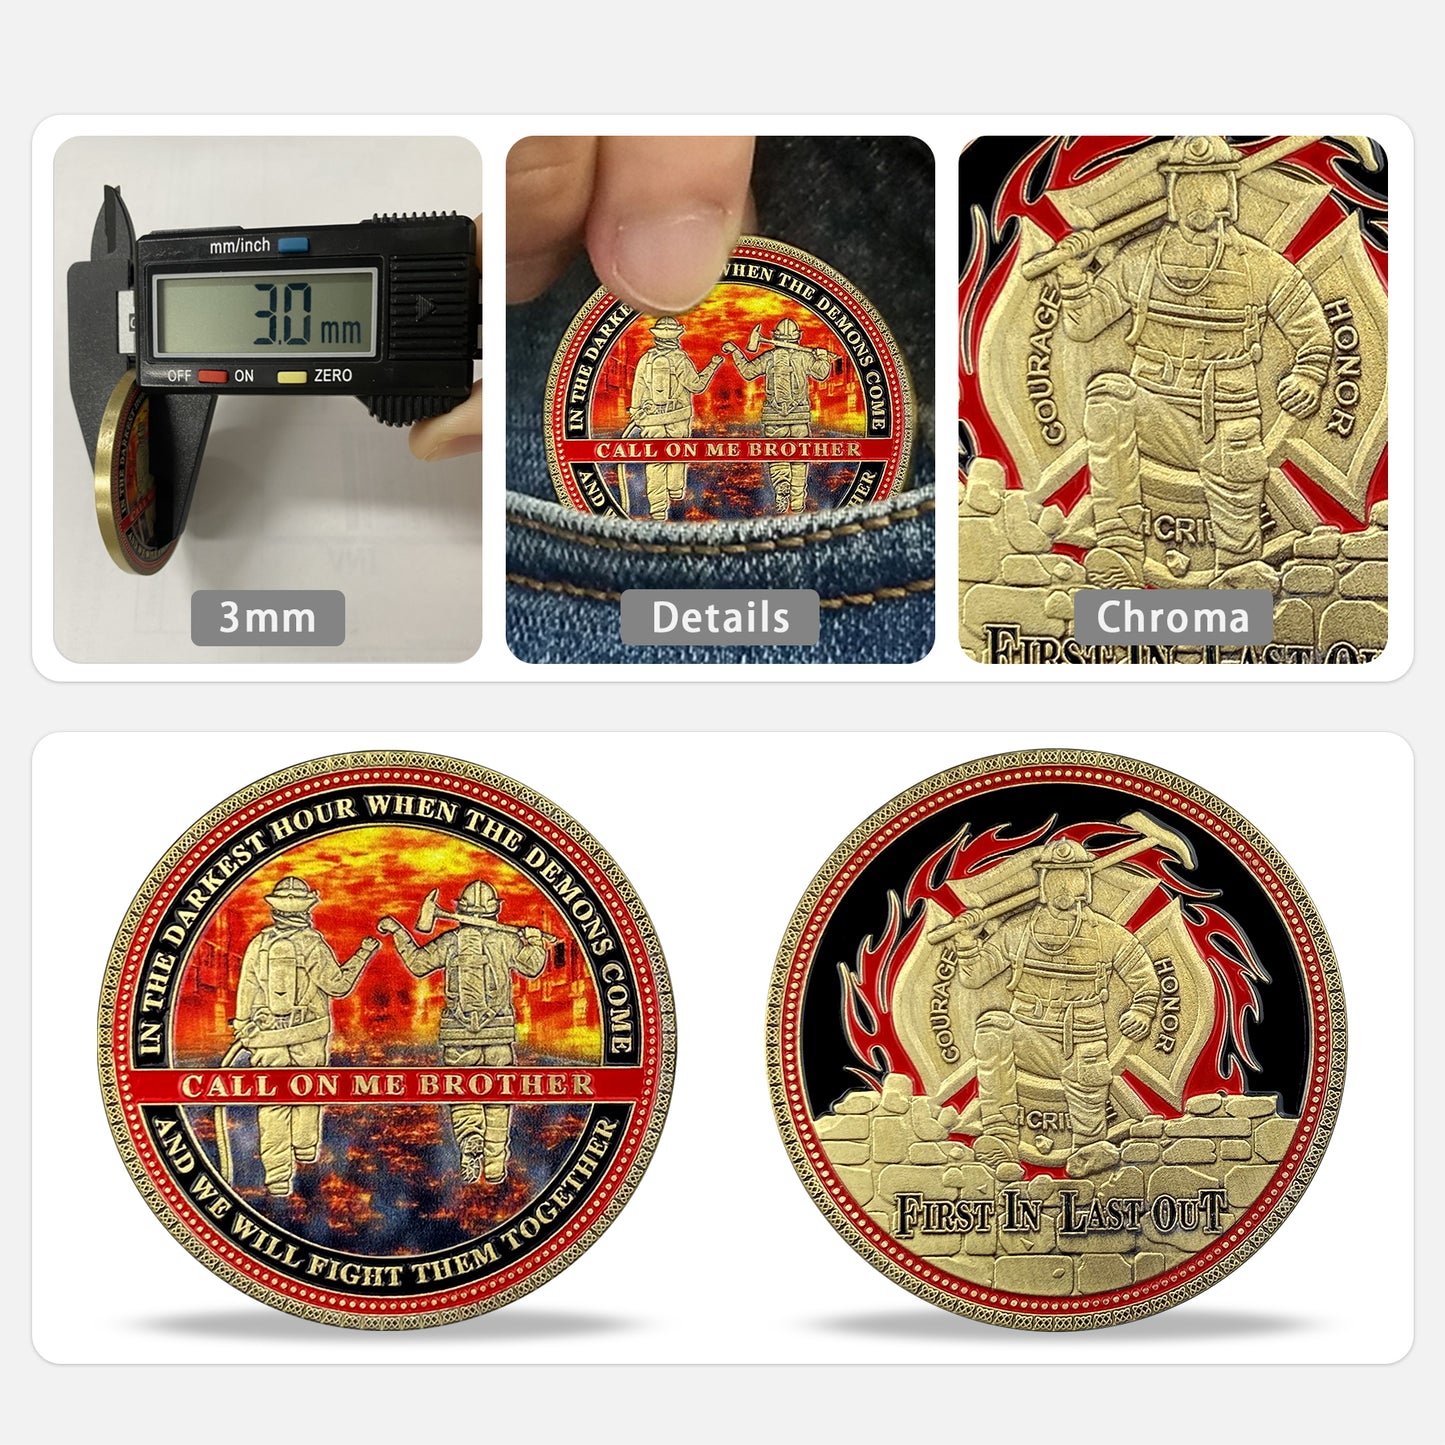 Fire Department Firefighter Brother Challenge Coin Thank You Appreciation Coin